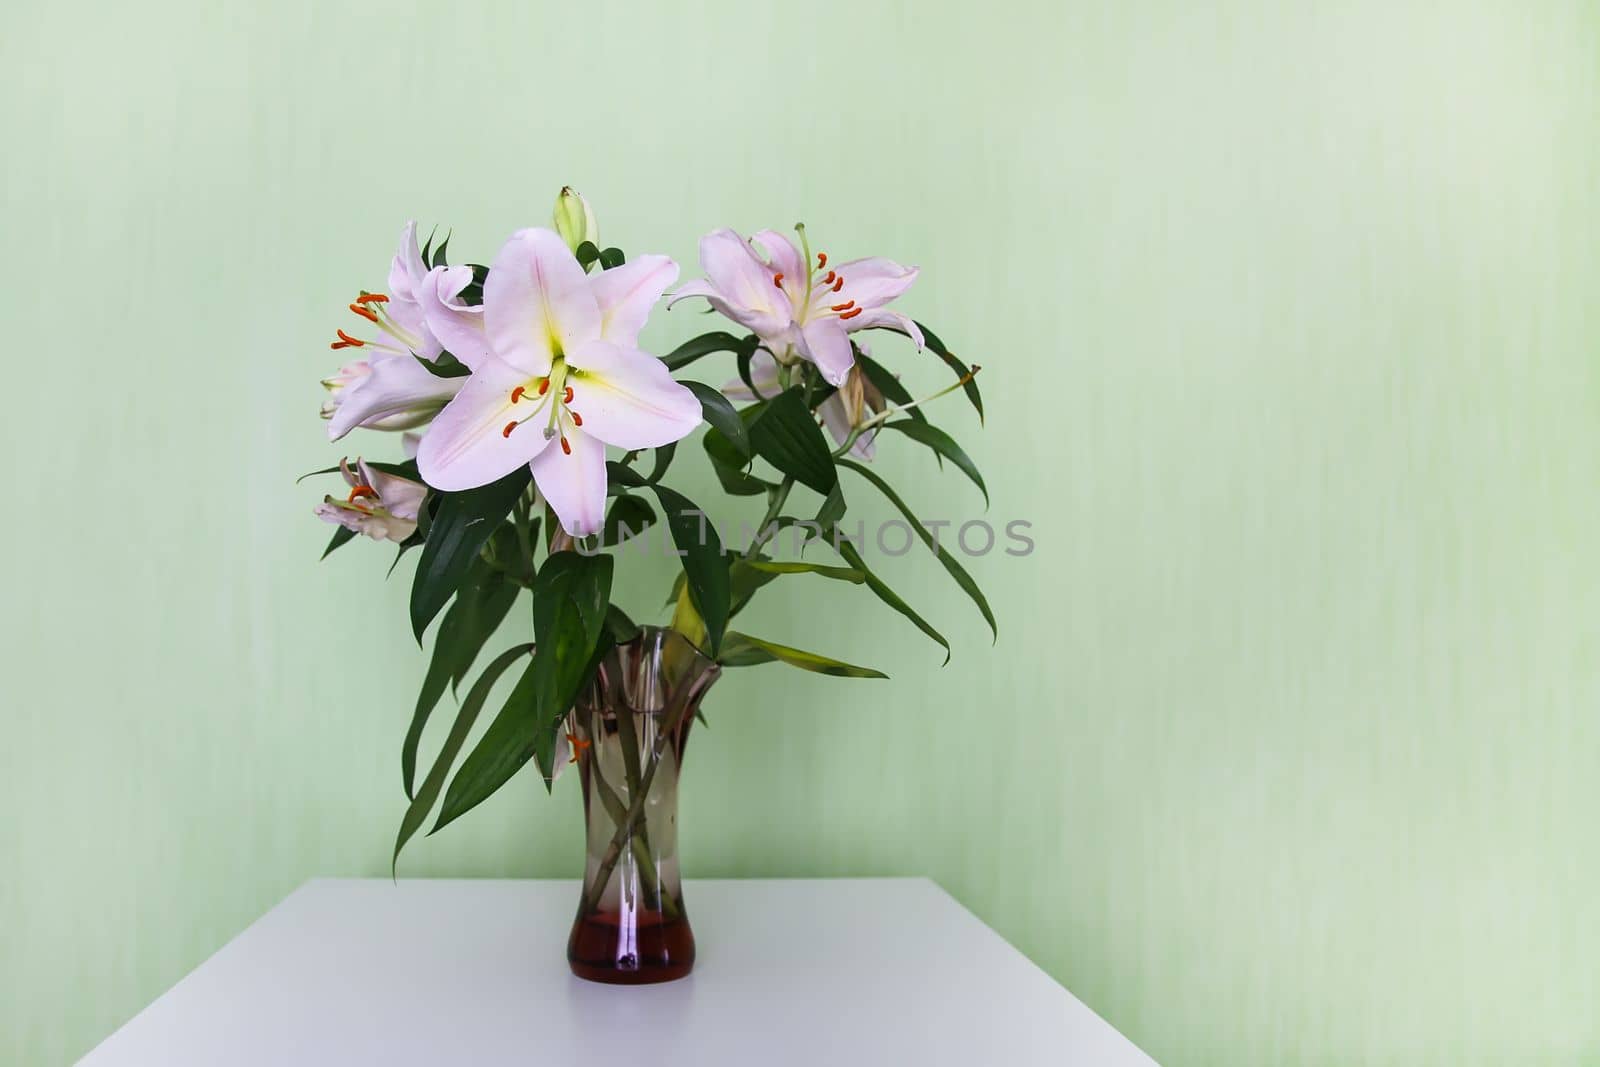 Beautiful white lily flowers in a bouquet. Elegant floral decor. by nightlyviolet